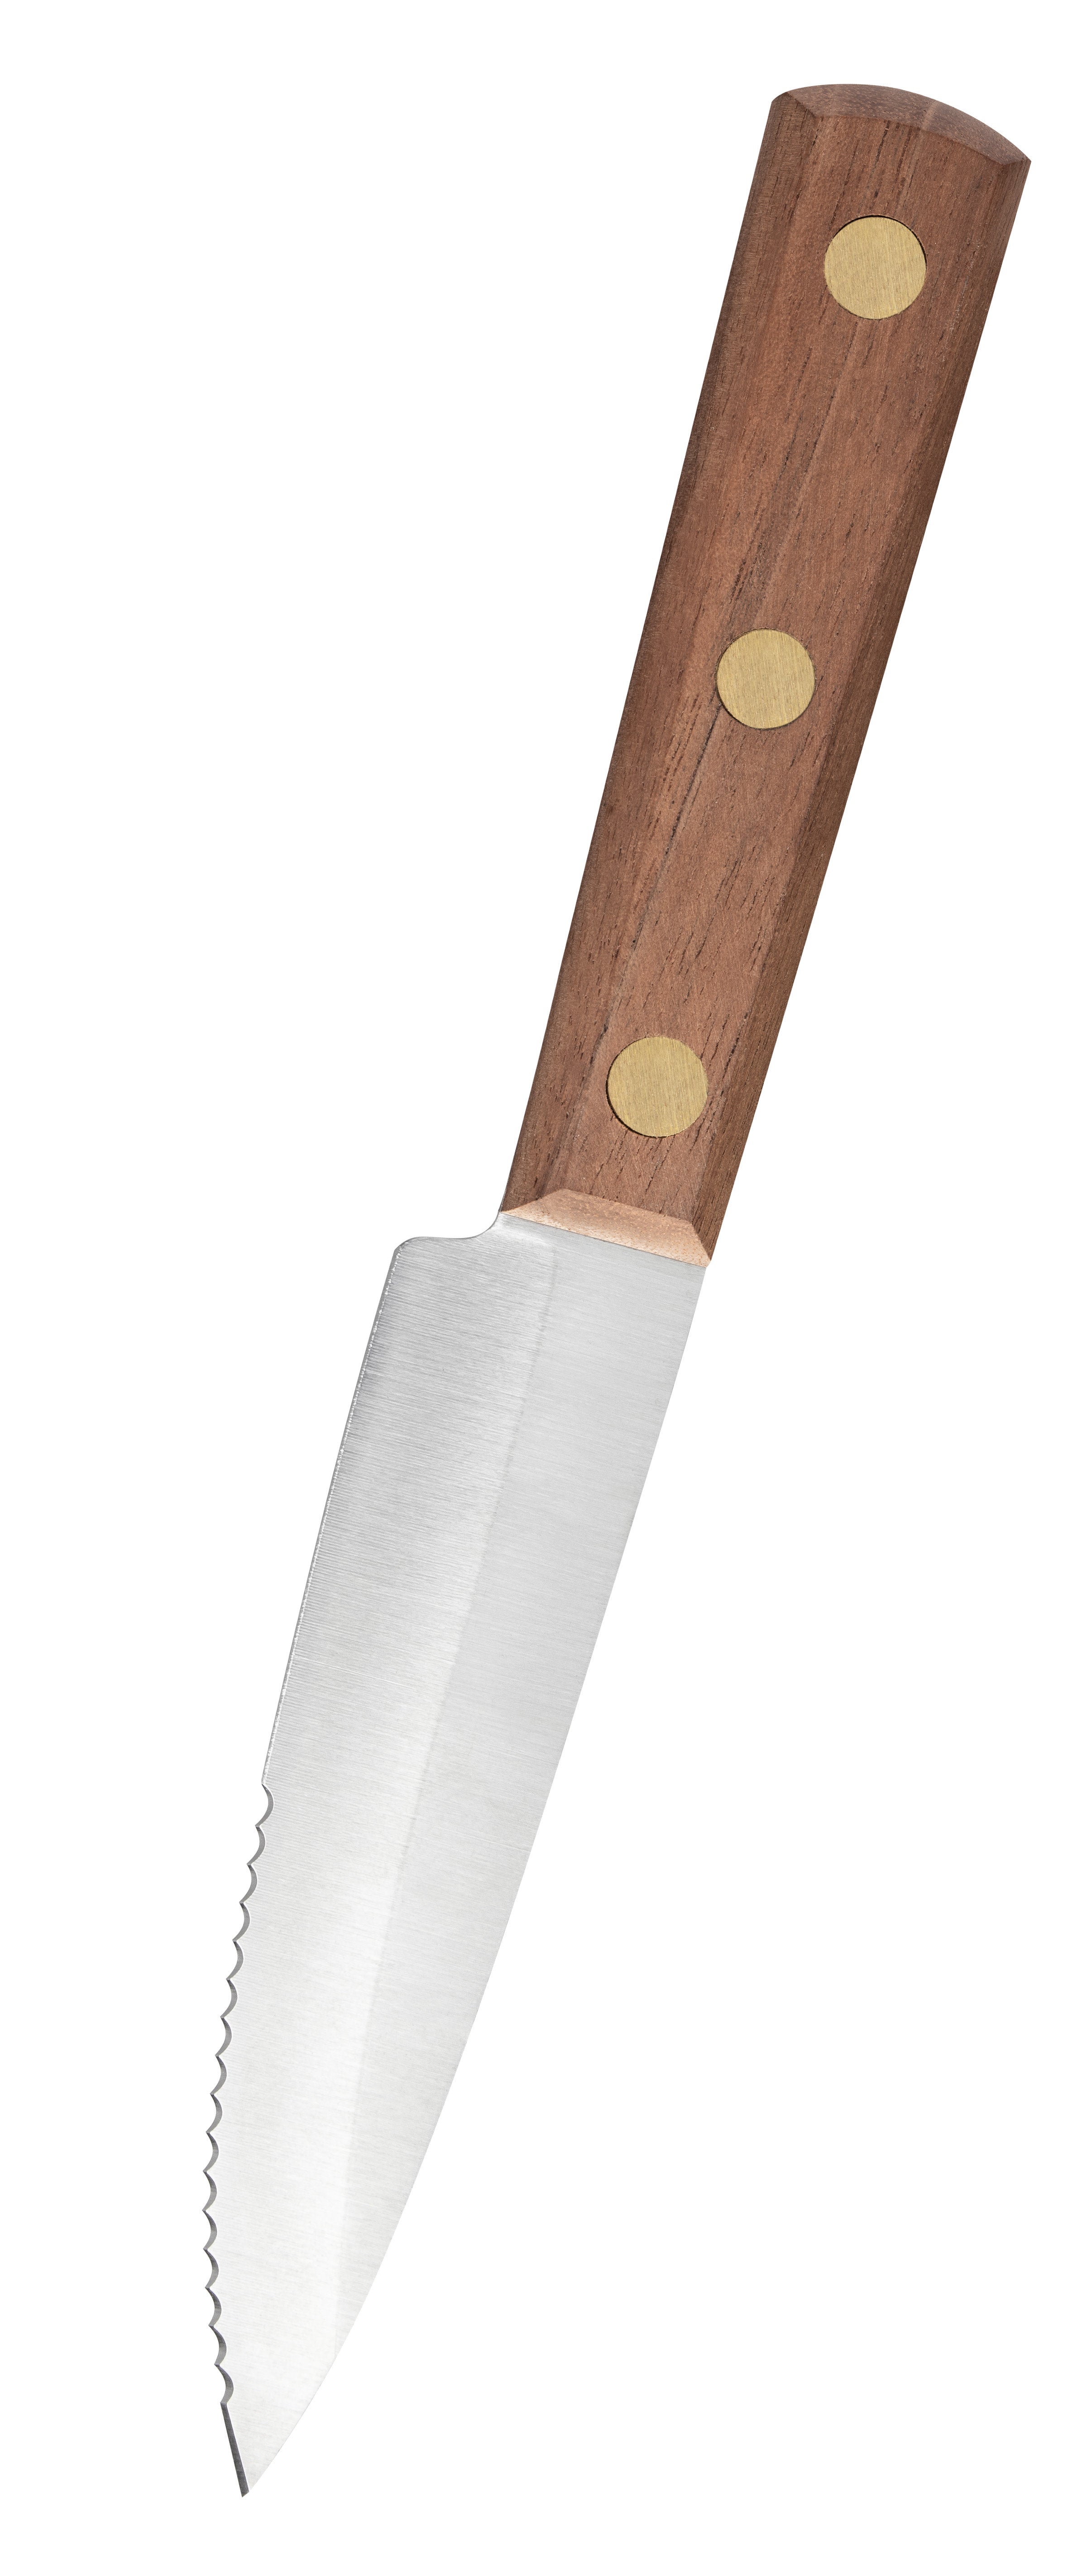 Household Cutlery 8" Slicing Knife (Solid Walnut) Back View